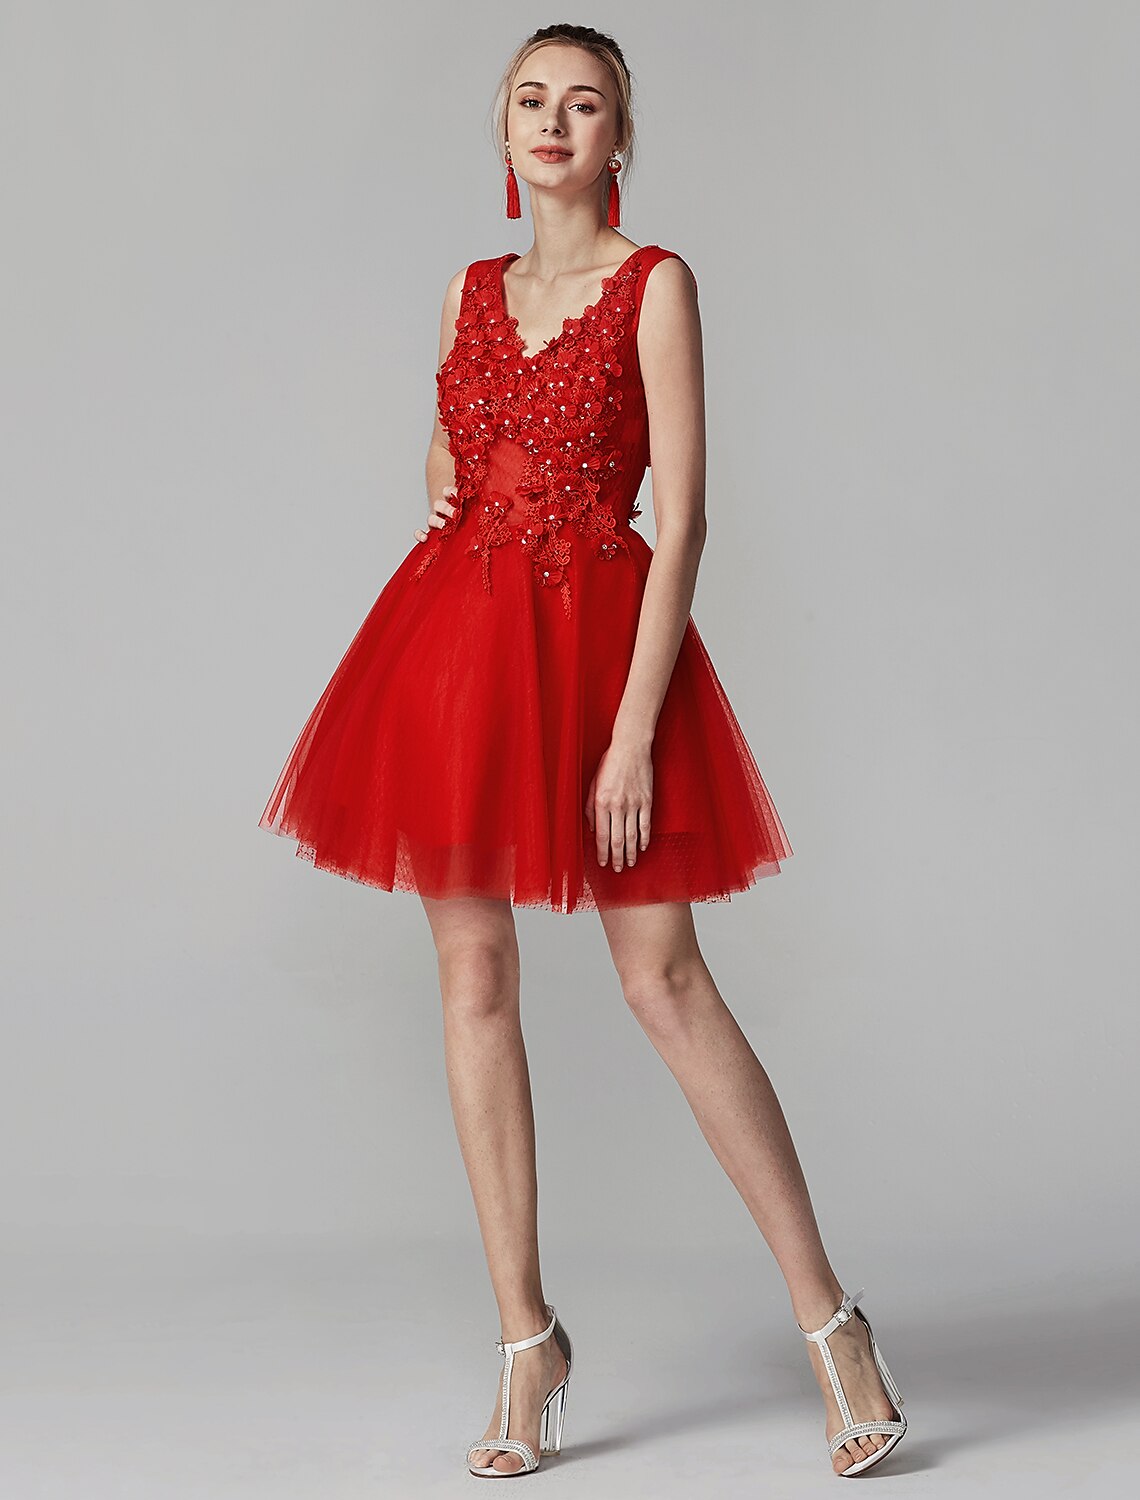 A-Line Party Dress Homecoming Graduation Short / Mini Sleeveless V Neck Lace Over Tulle with Crystals Appliques